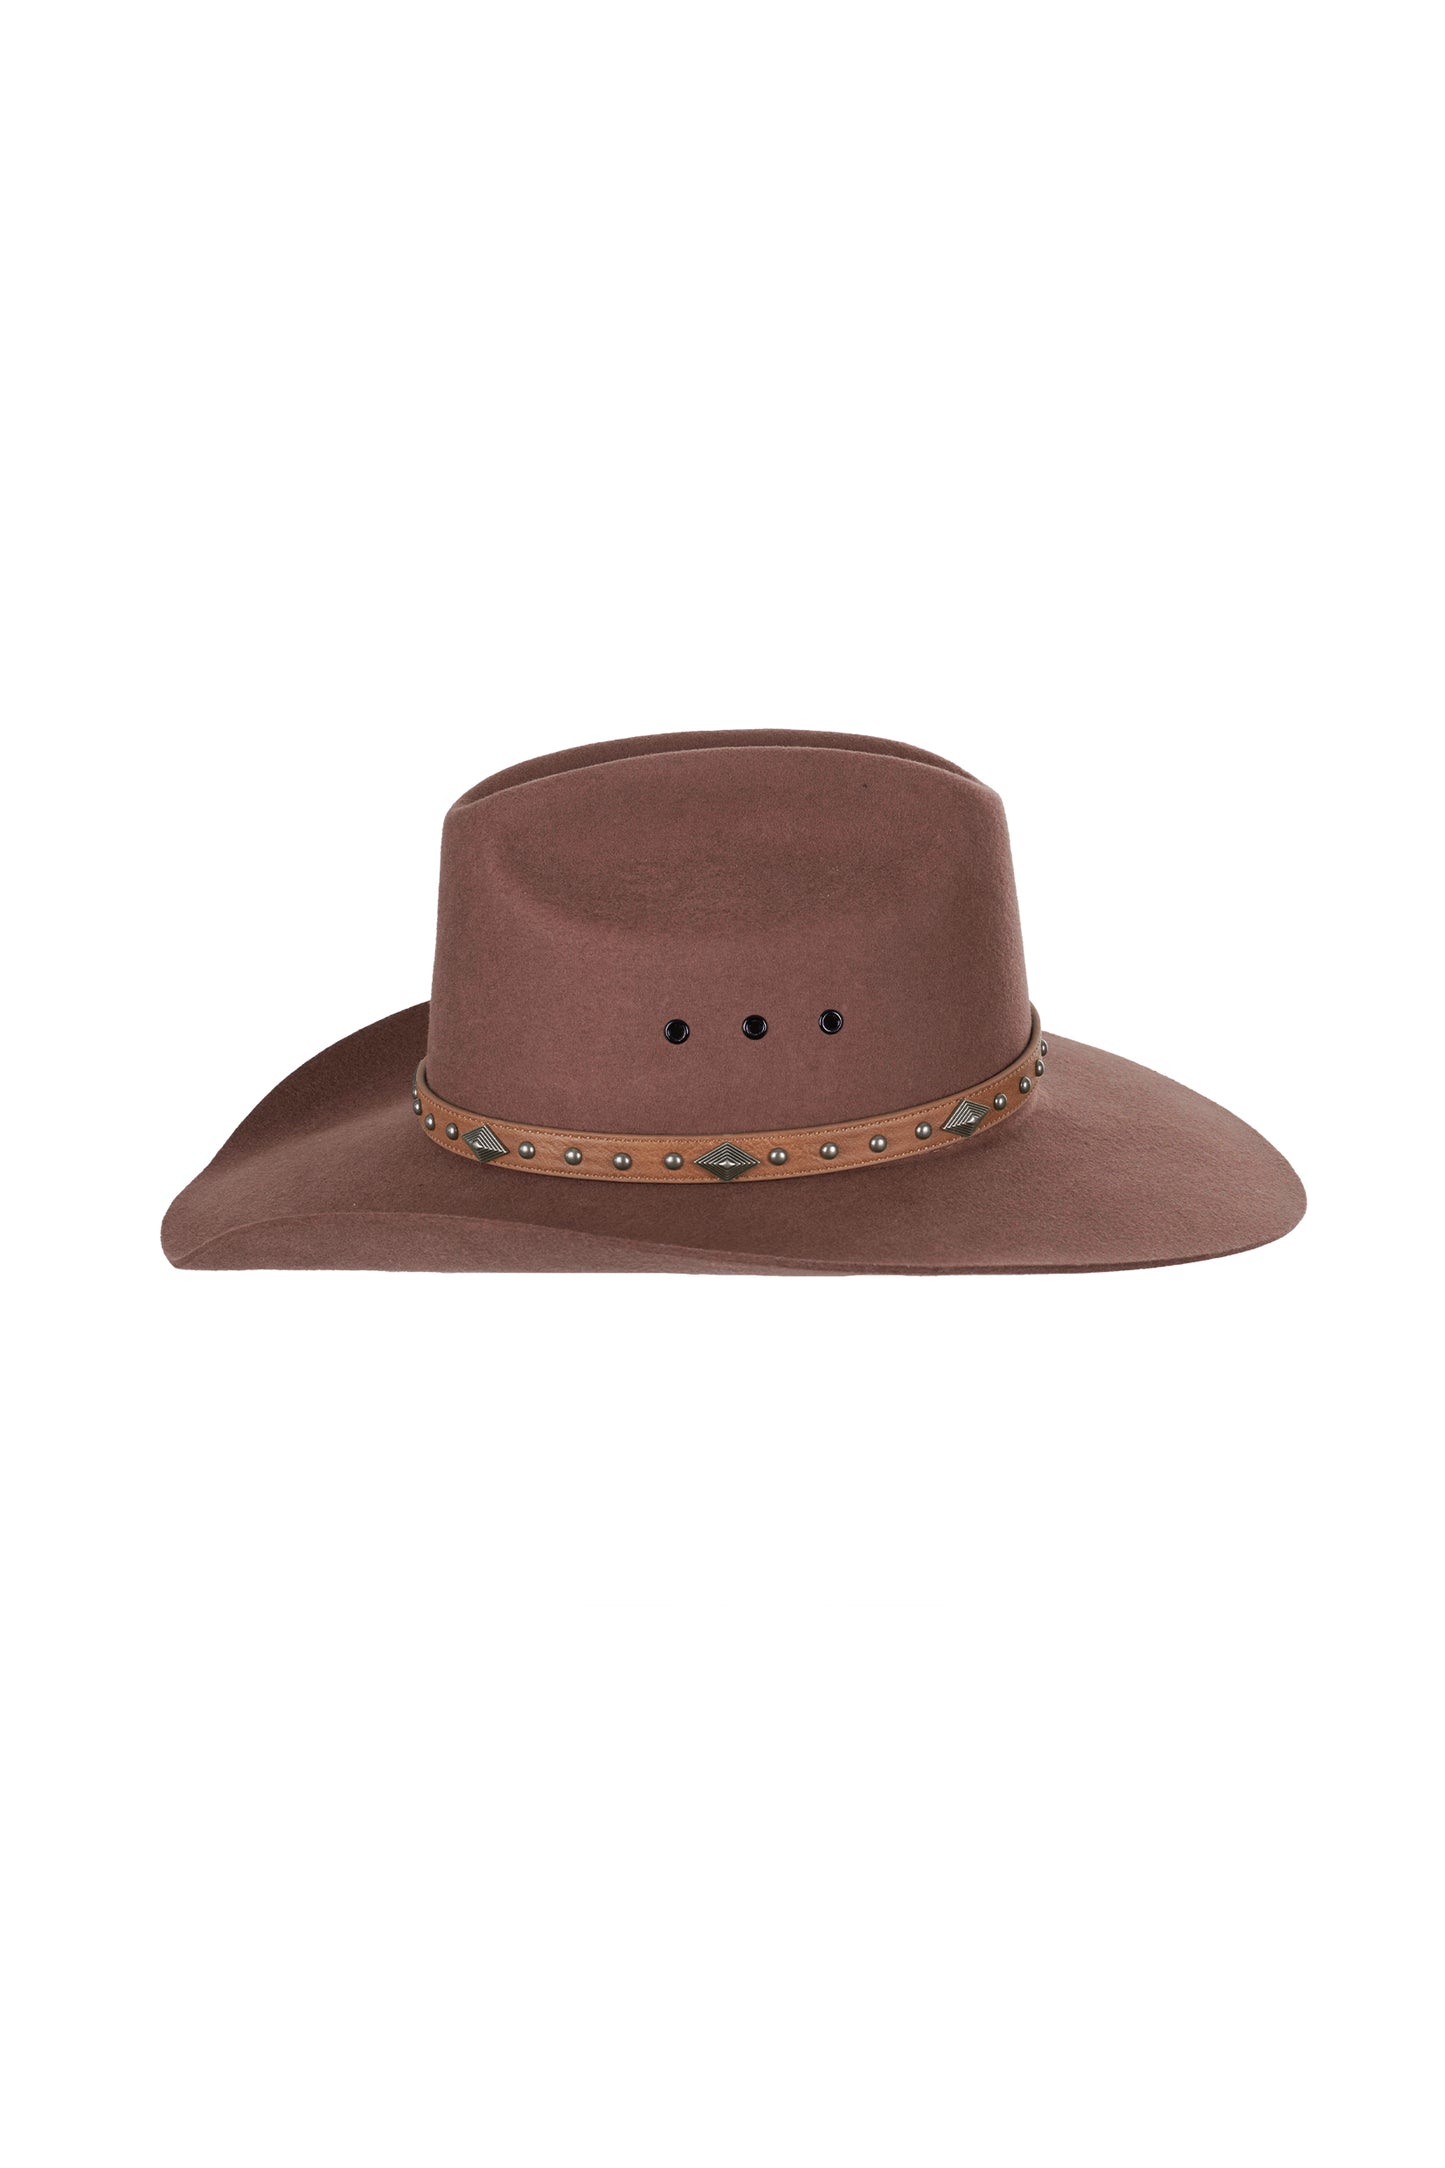 Pure Western Toby Hat Band - Tan - P4W2920BND